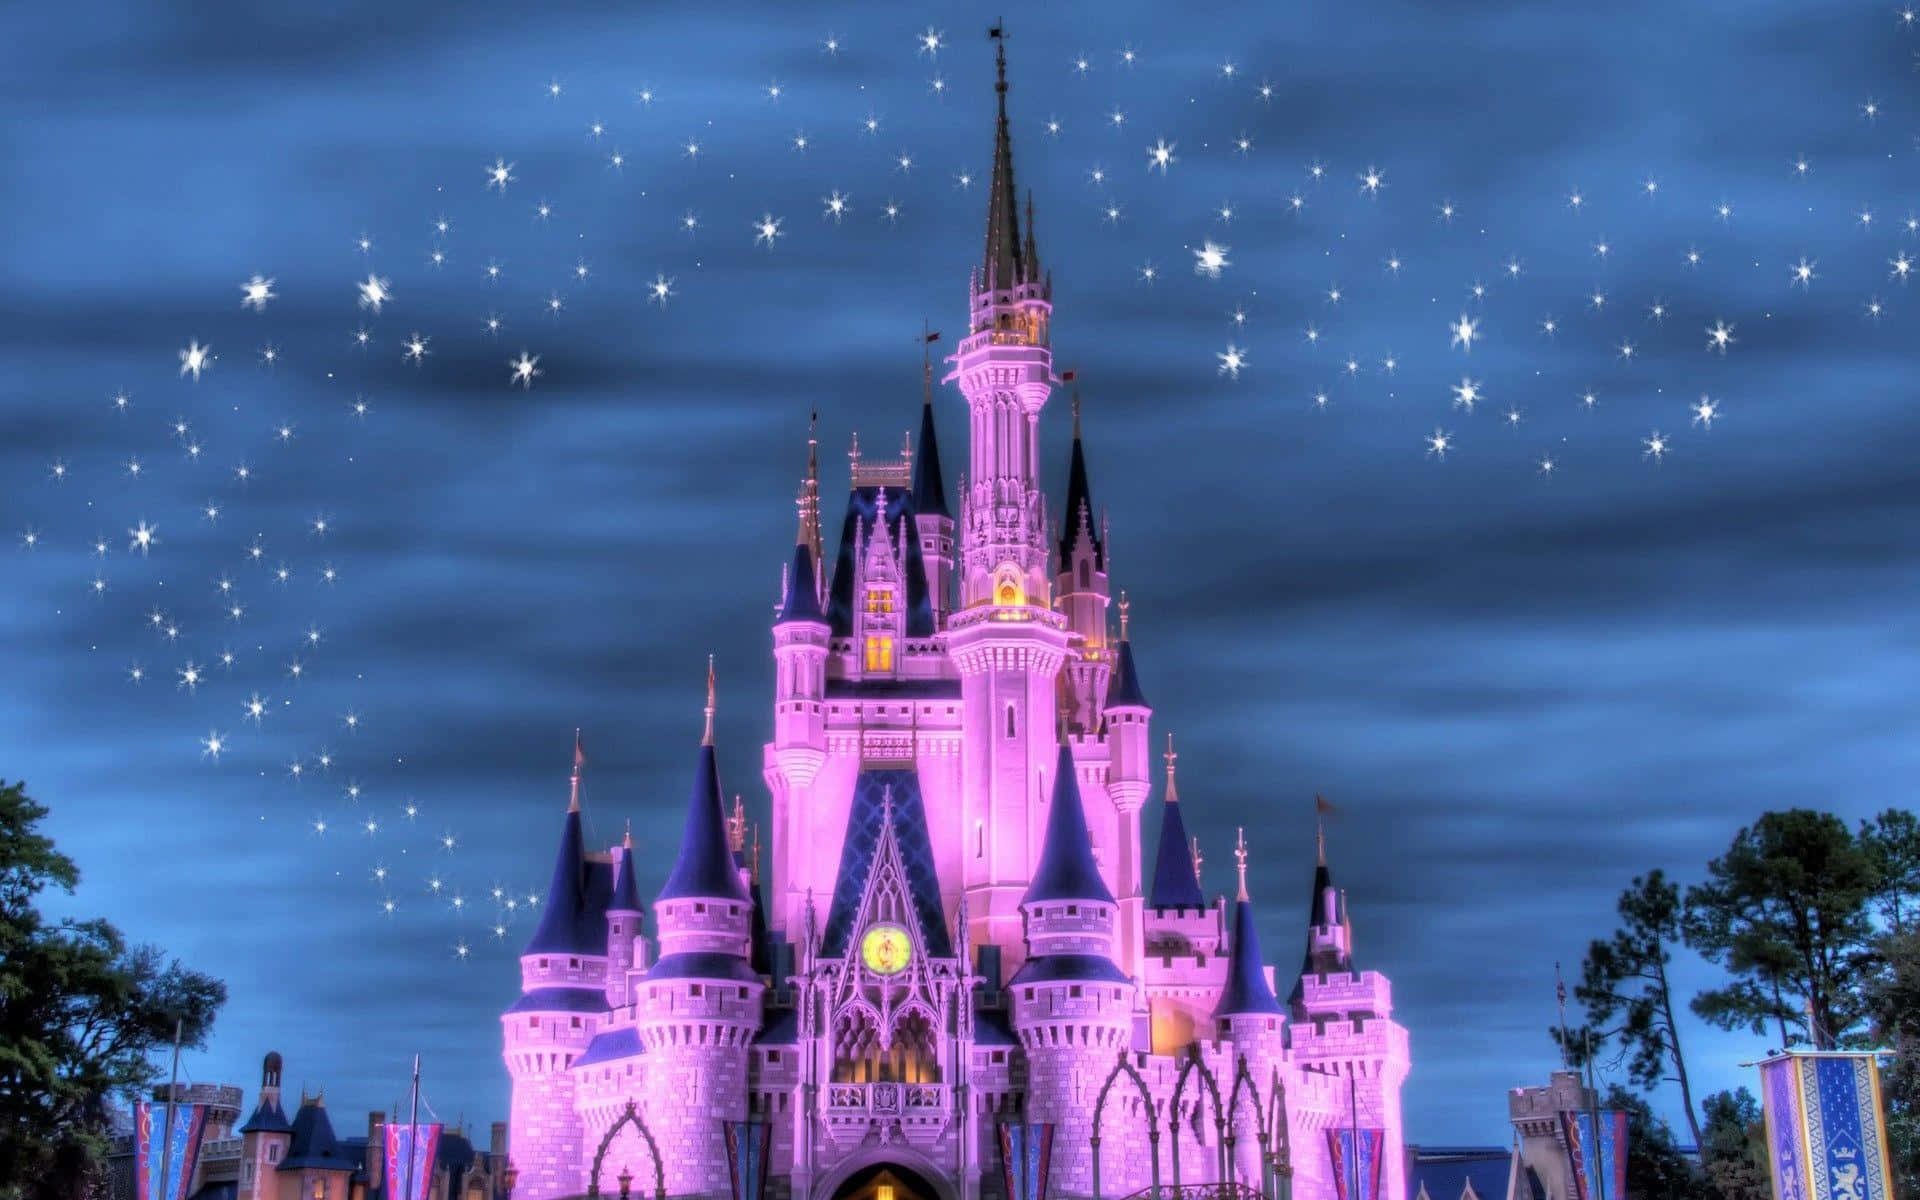 "Dreaming of Magical Adventures at Disney Castle"